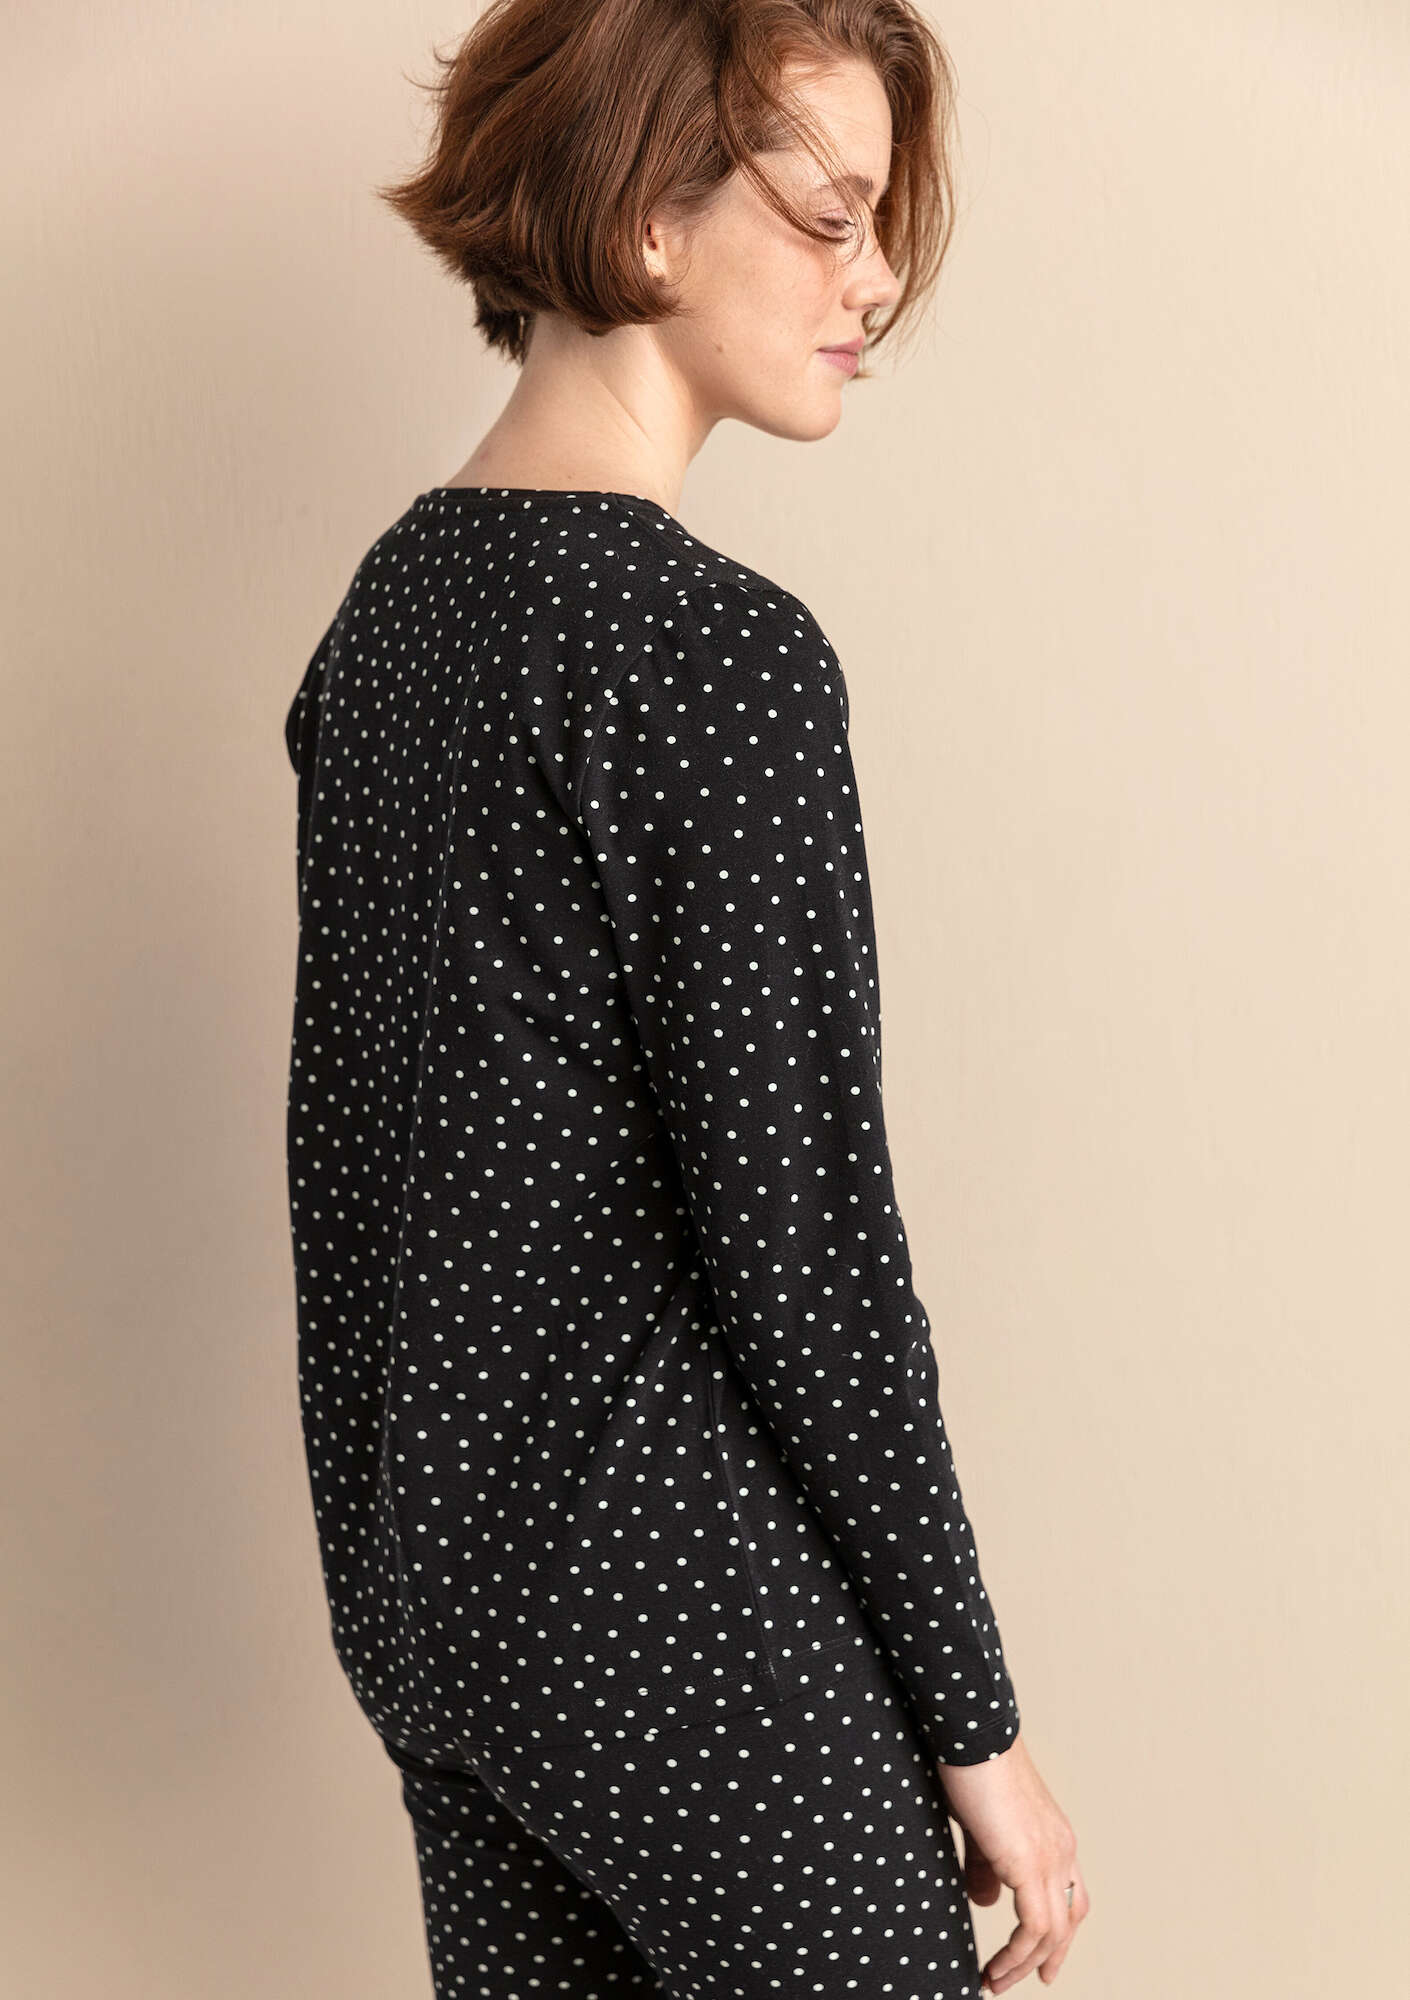 “Pytte” jersey top in organic cotton/spandex black/patterned